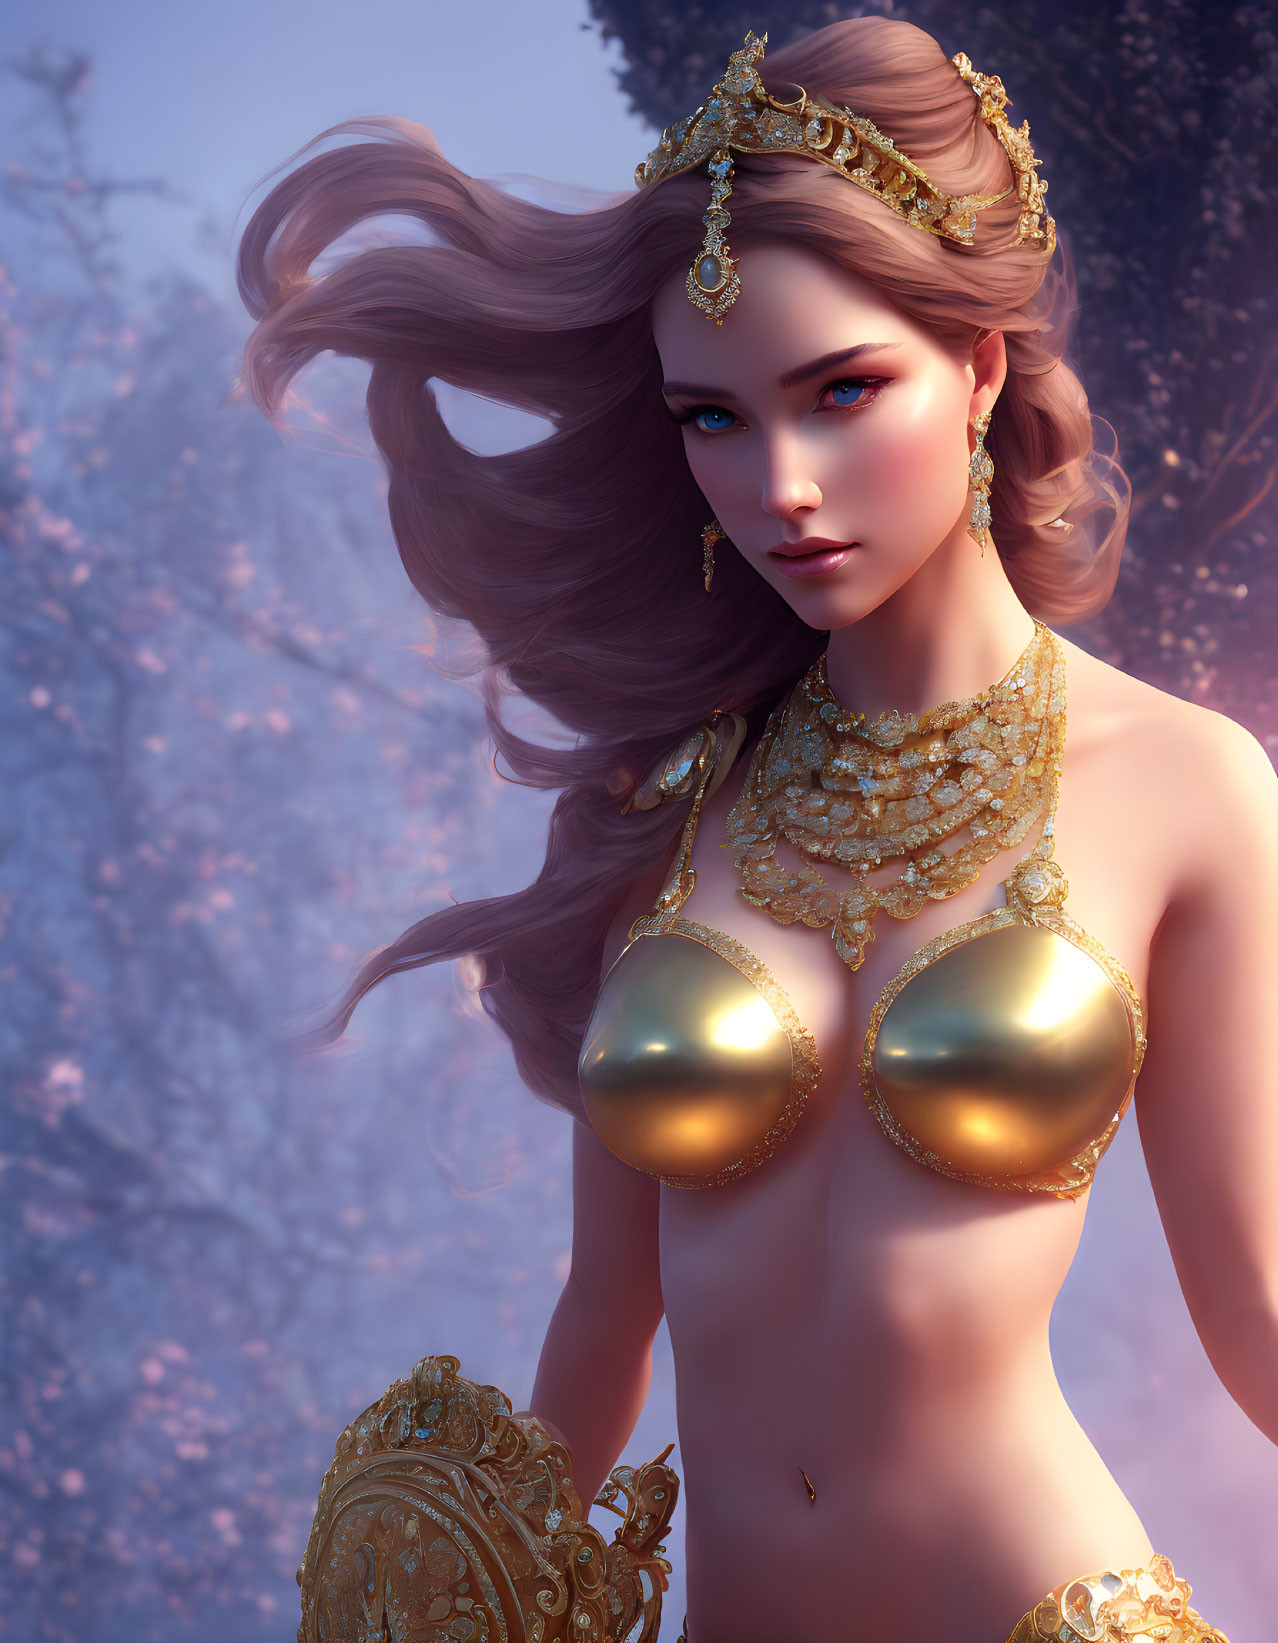 Fantasy elf with flowing hair and ornate gold jewelry in mystical purple forest